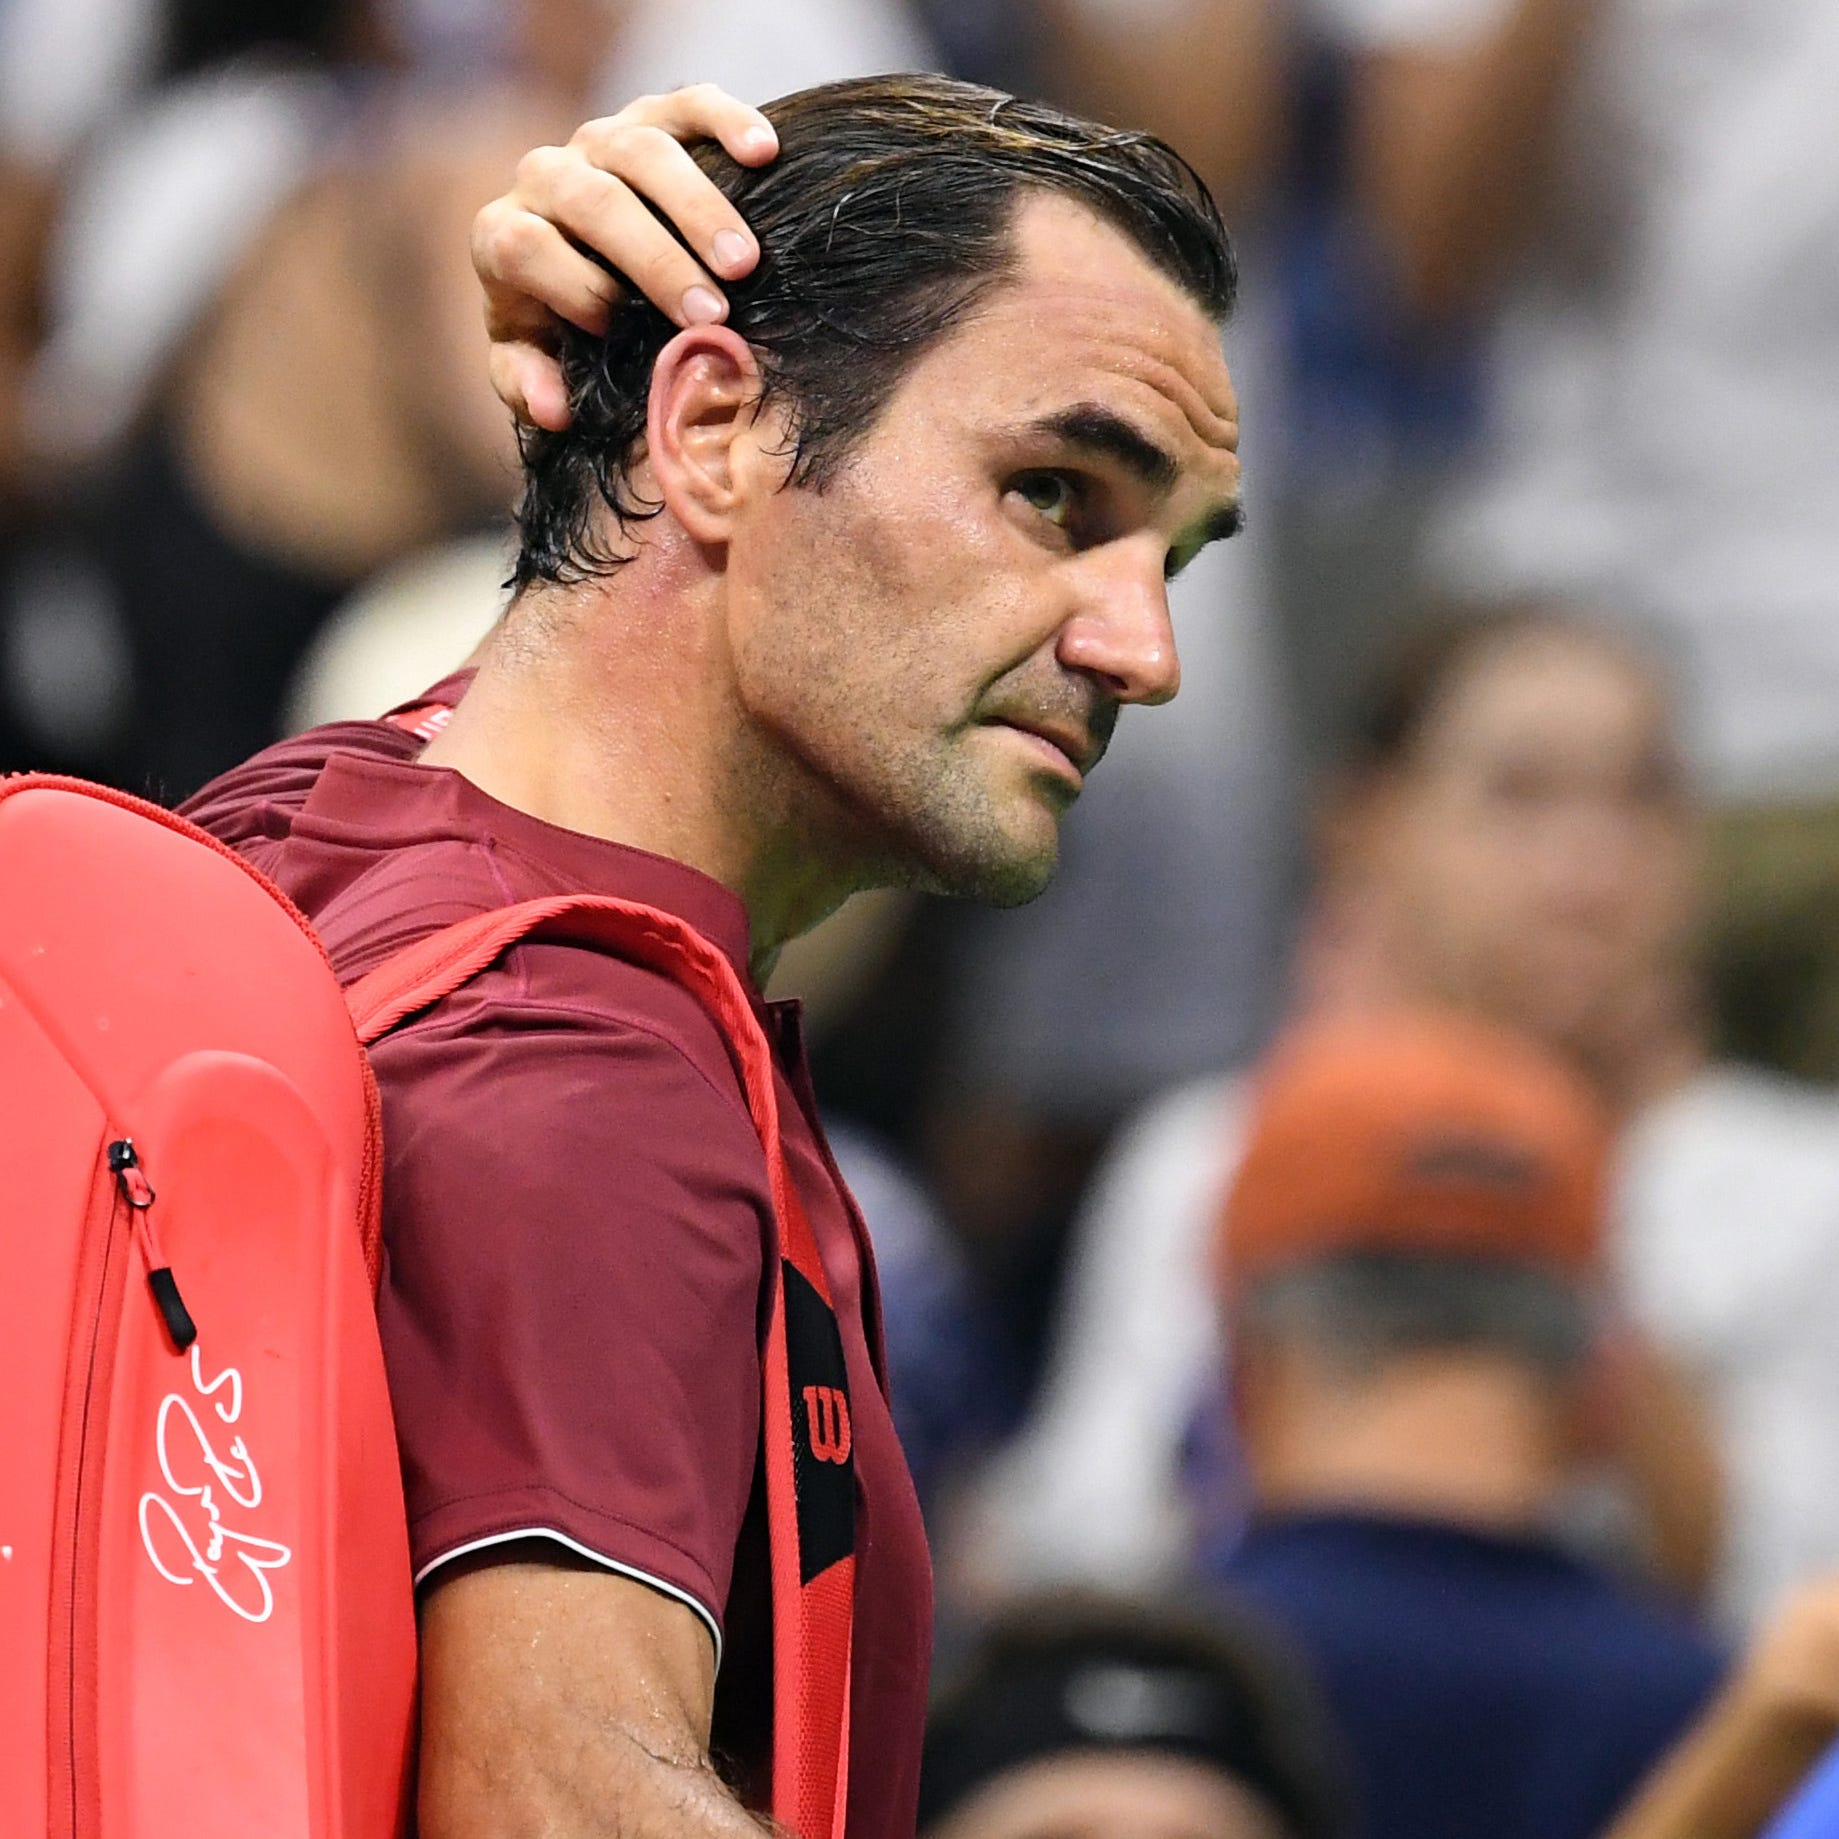 Roger Federer owalks off the court after his loss to John Millman.